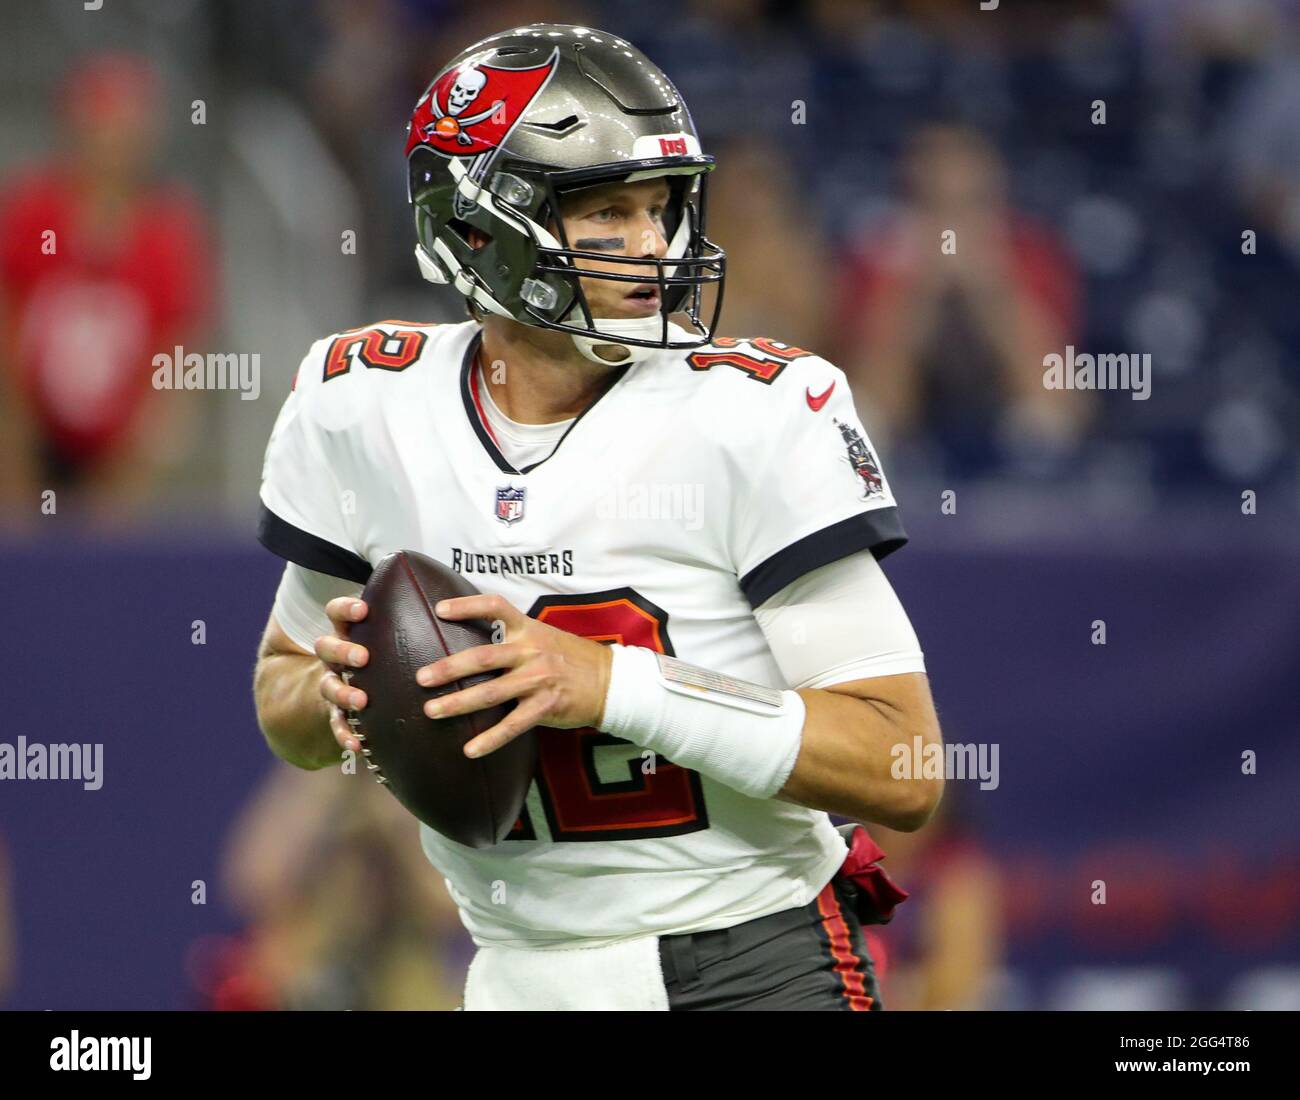 August 28, 2021: Tampa Bay Buccaneers quarterback Tom Brady (12) drops back to pass during an NFL preseason game between the Houston Texans and the Tampa Bay Buccaneers on August 28, 2021 in Houston, Texas. (Credit Image: © Scott Coleman/ZUMA Press Wire) Stock Photo